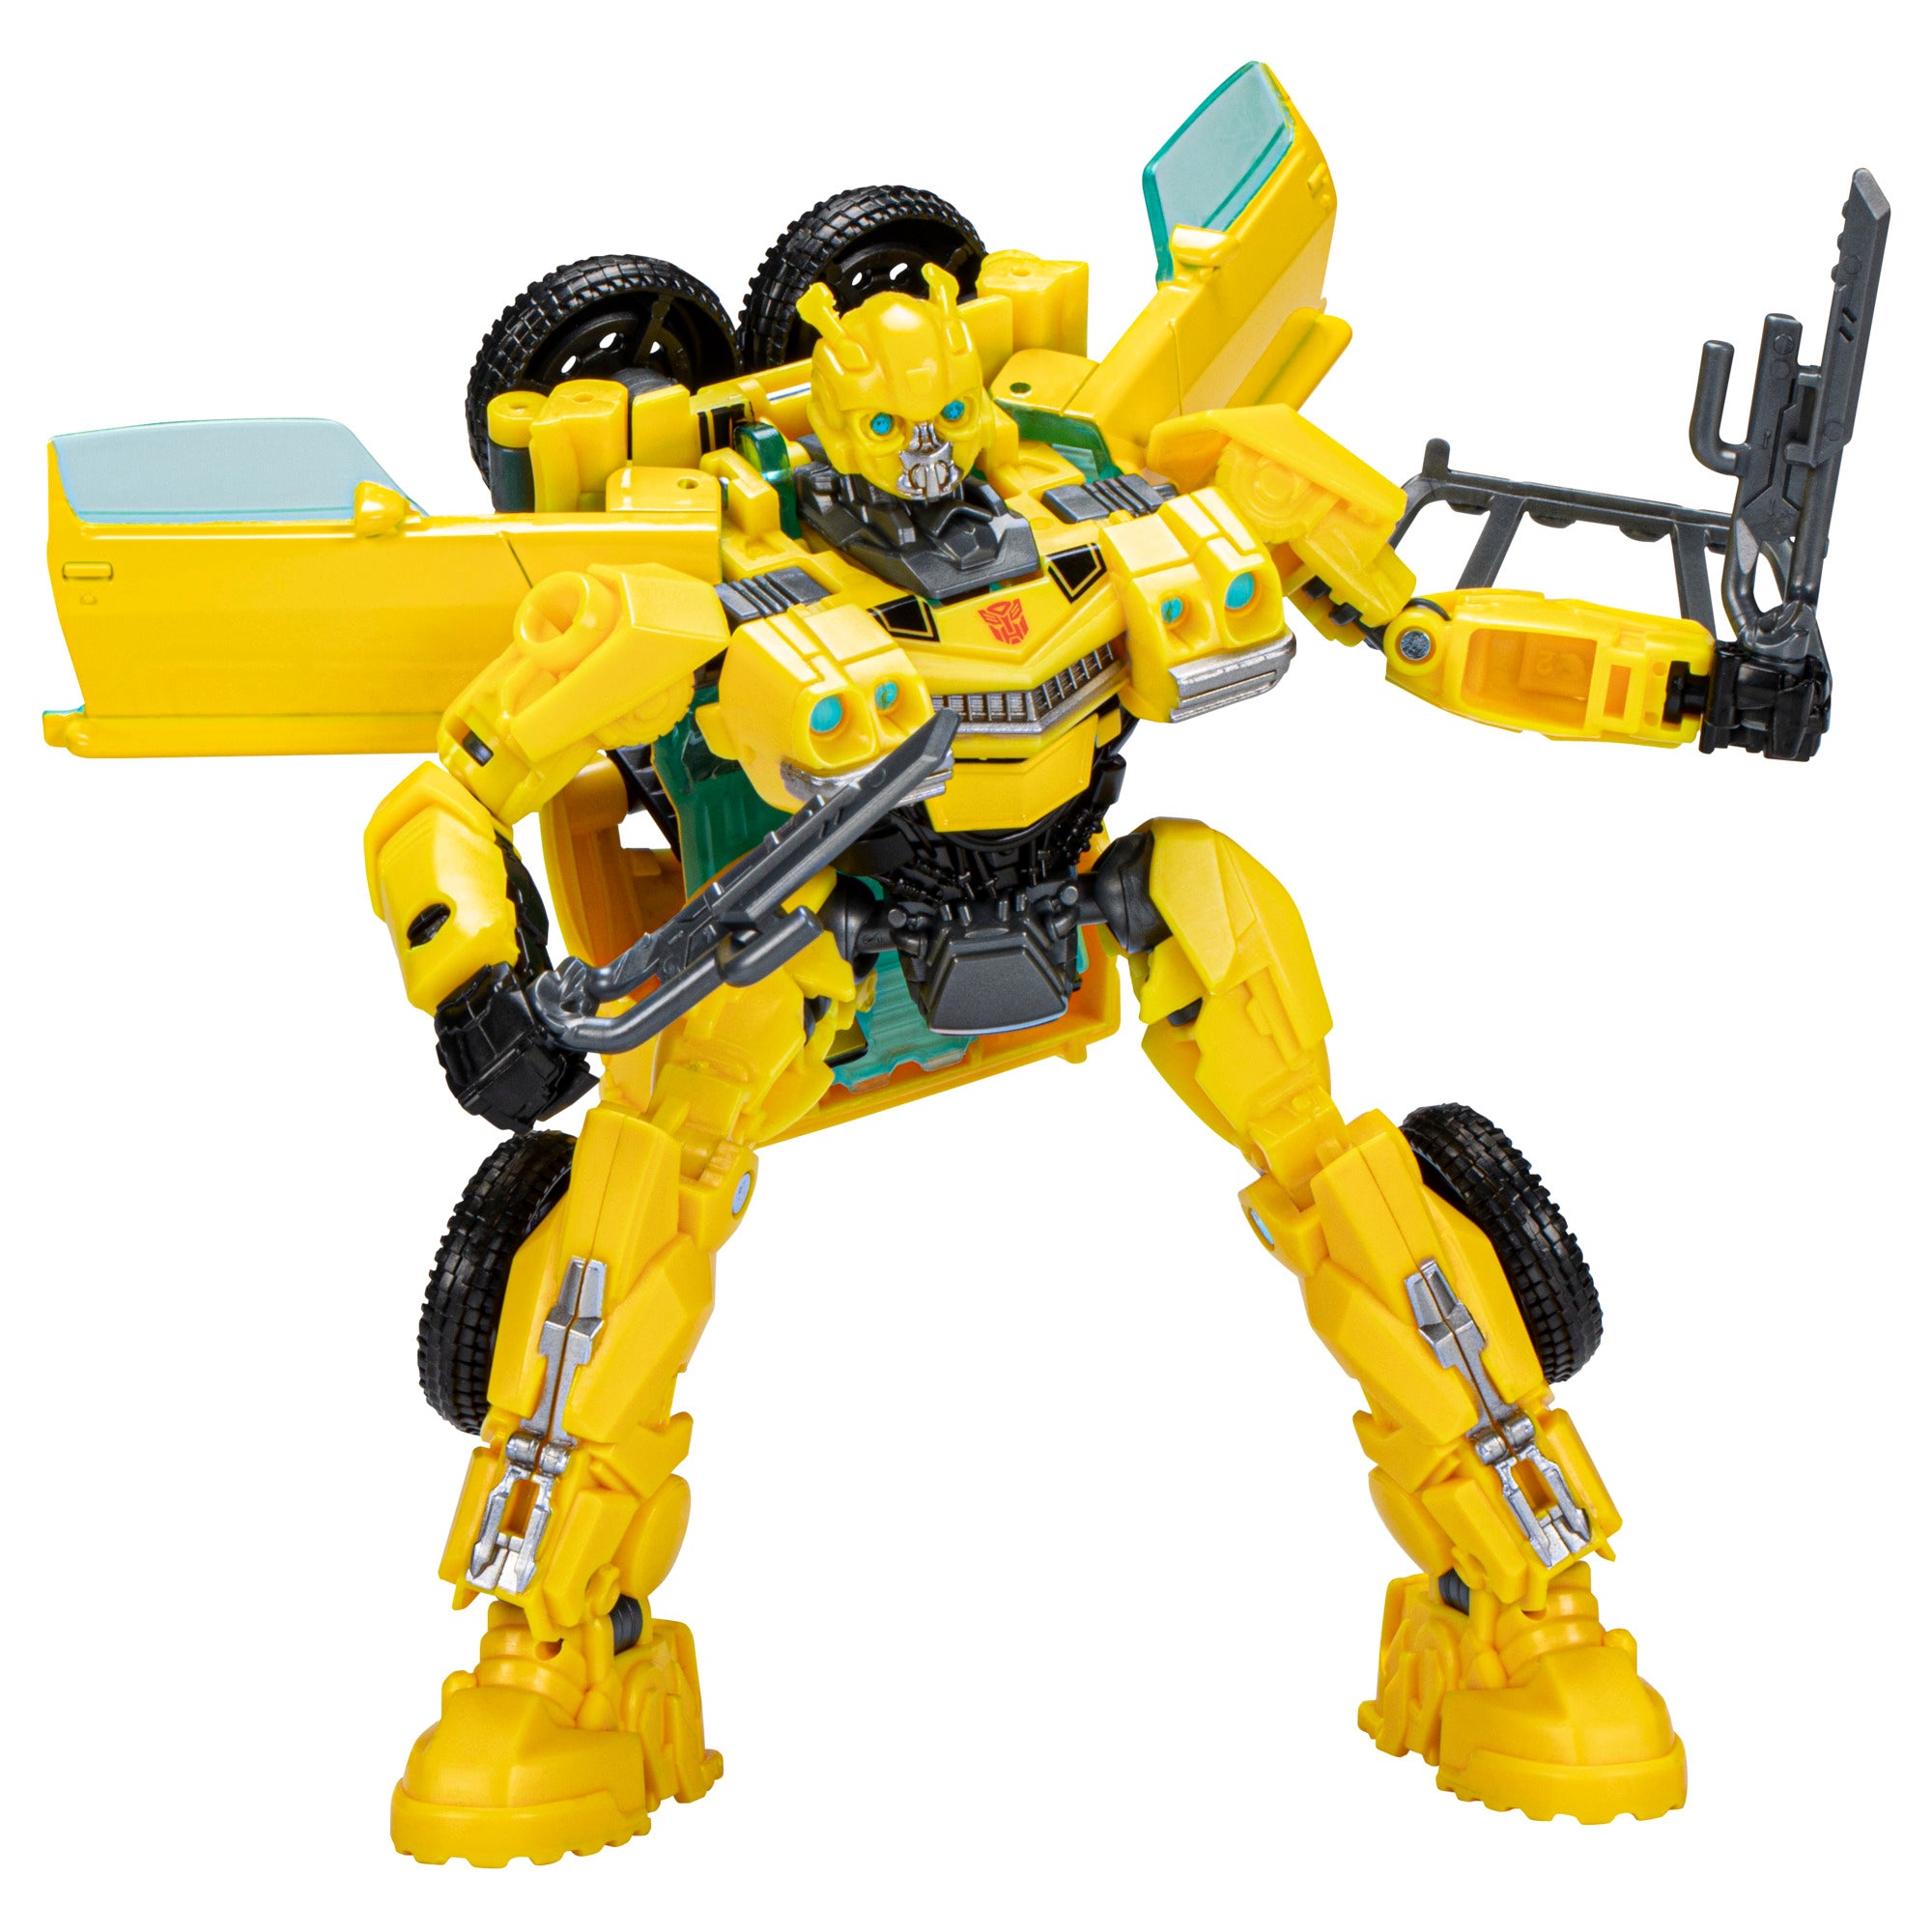 Transformers: Rise of the Beasts': Bumblebee Gets New Hasbro